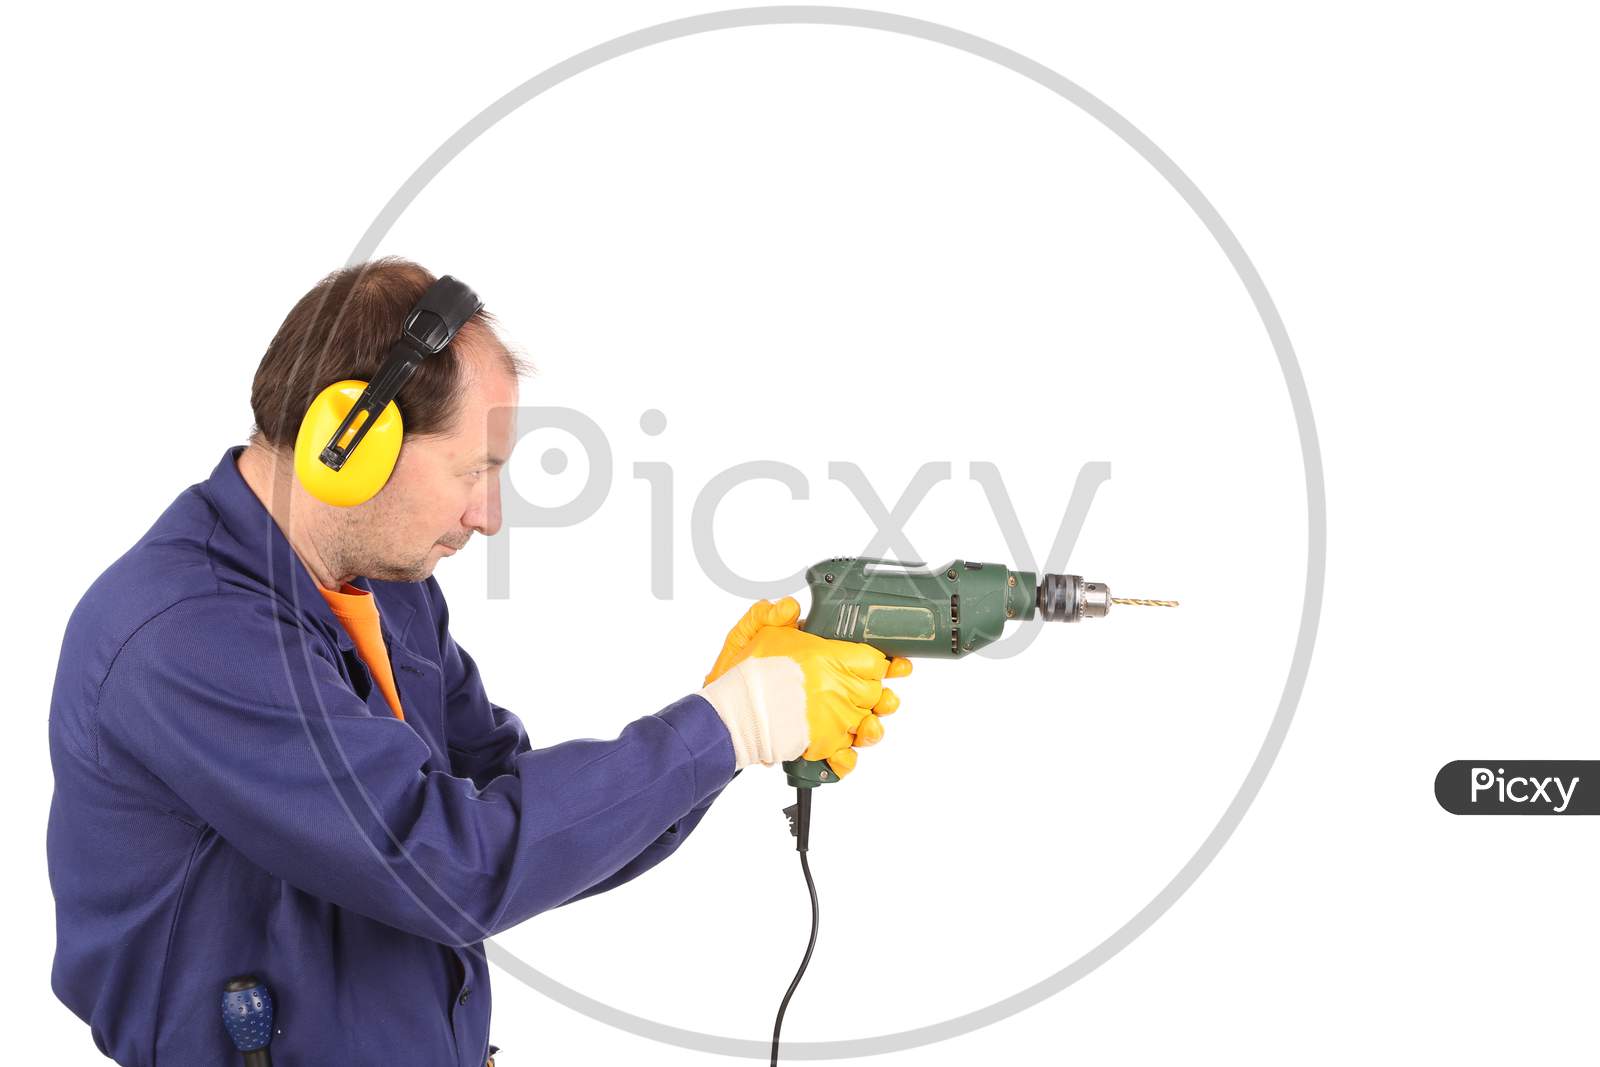 Worker On Ladder With Drill. Isolated On A White Background.